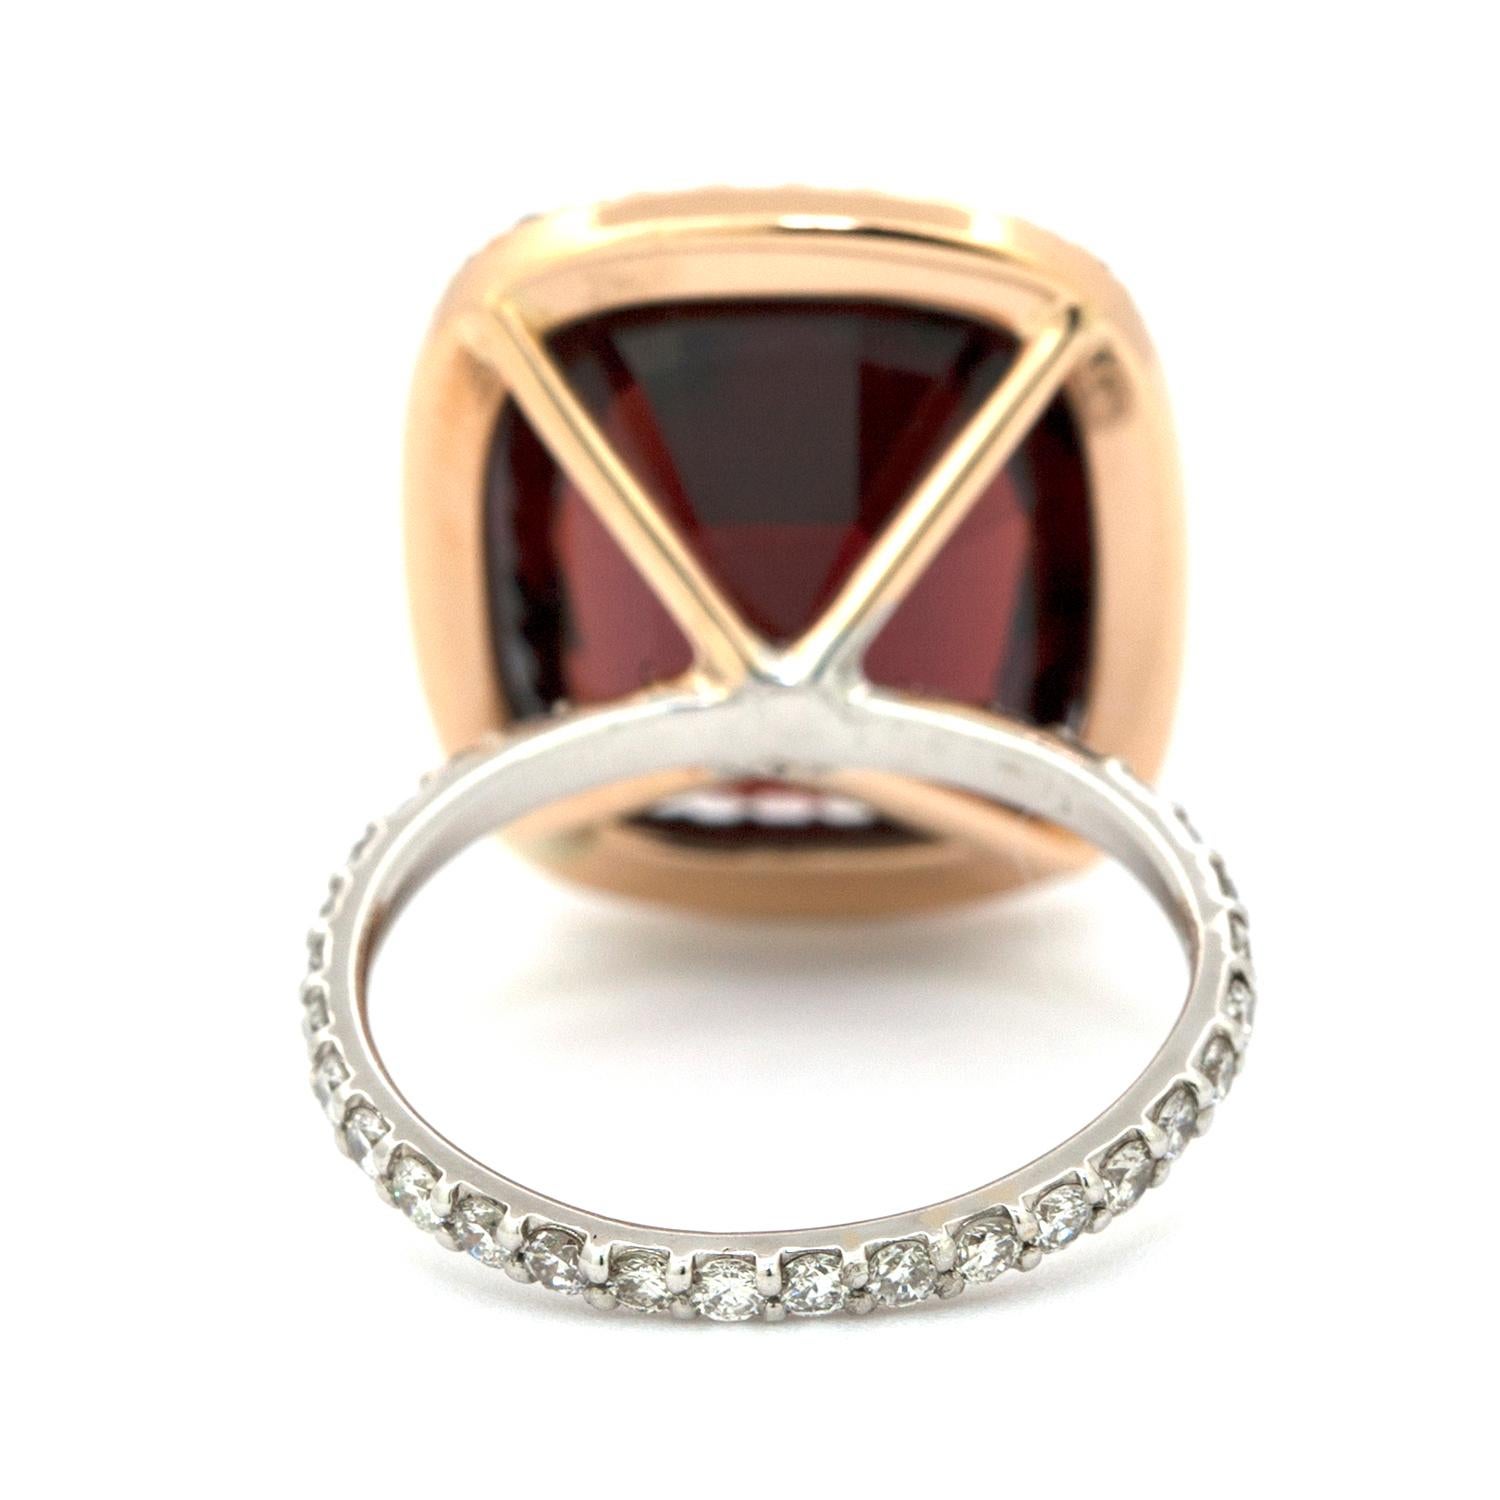 Contemporary 10.39 Carat Cushion Cut Certified Burma Spinel and Diamond Ring For Sale